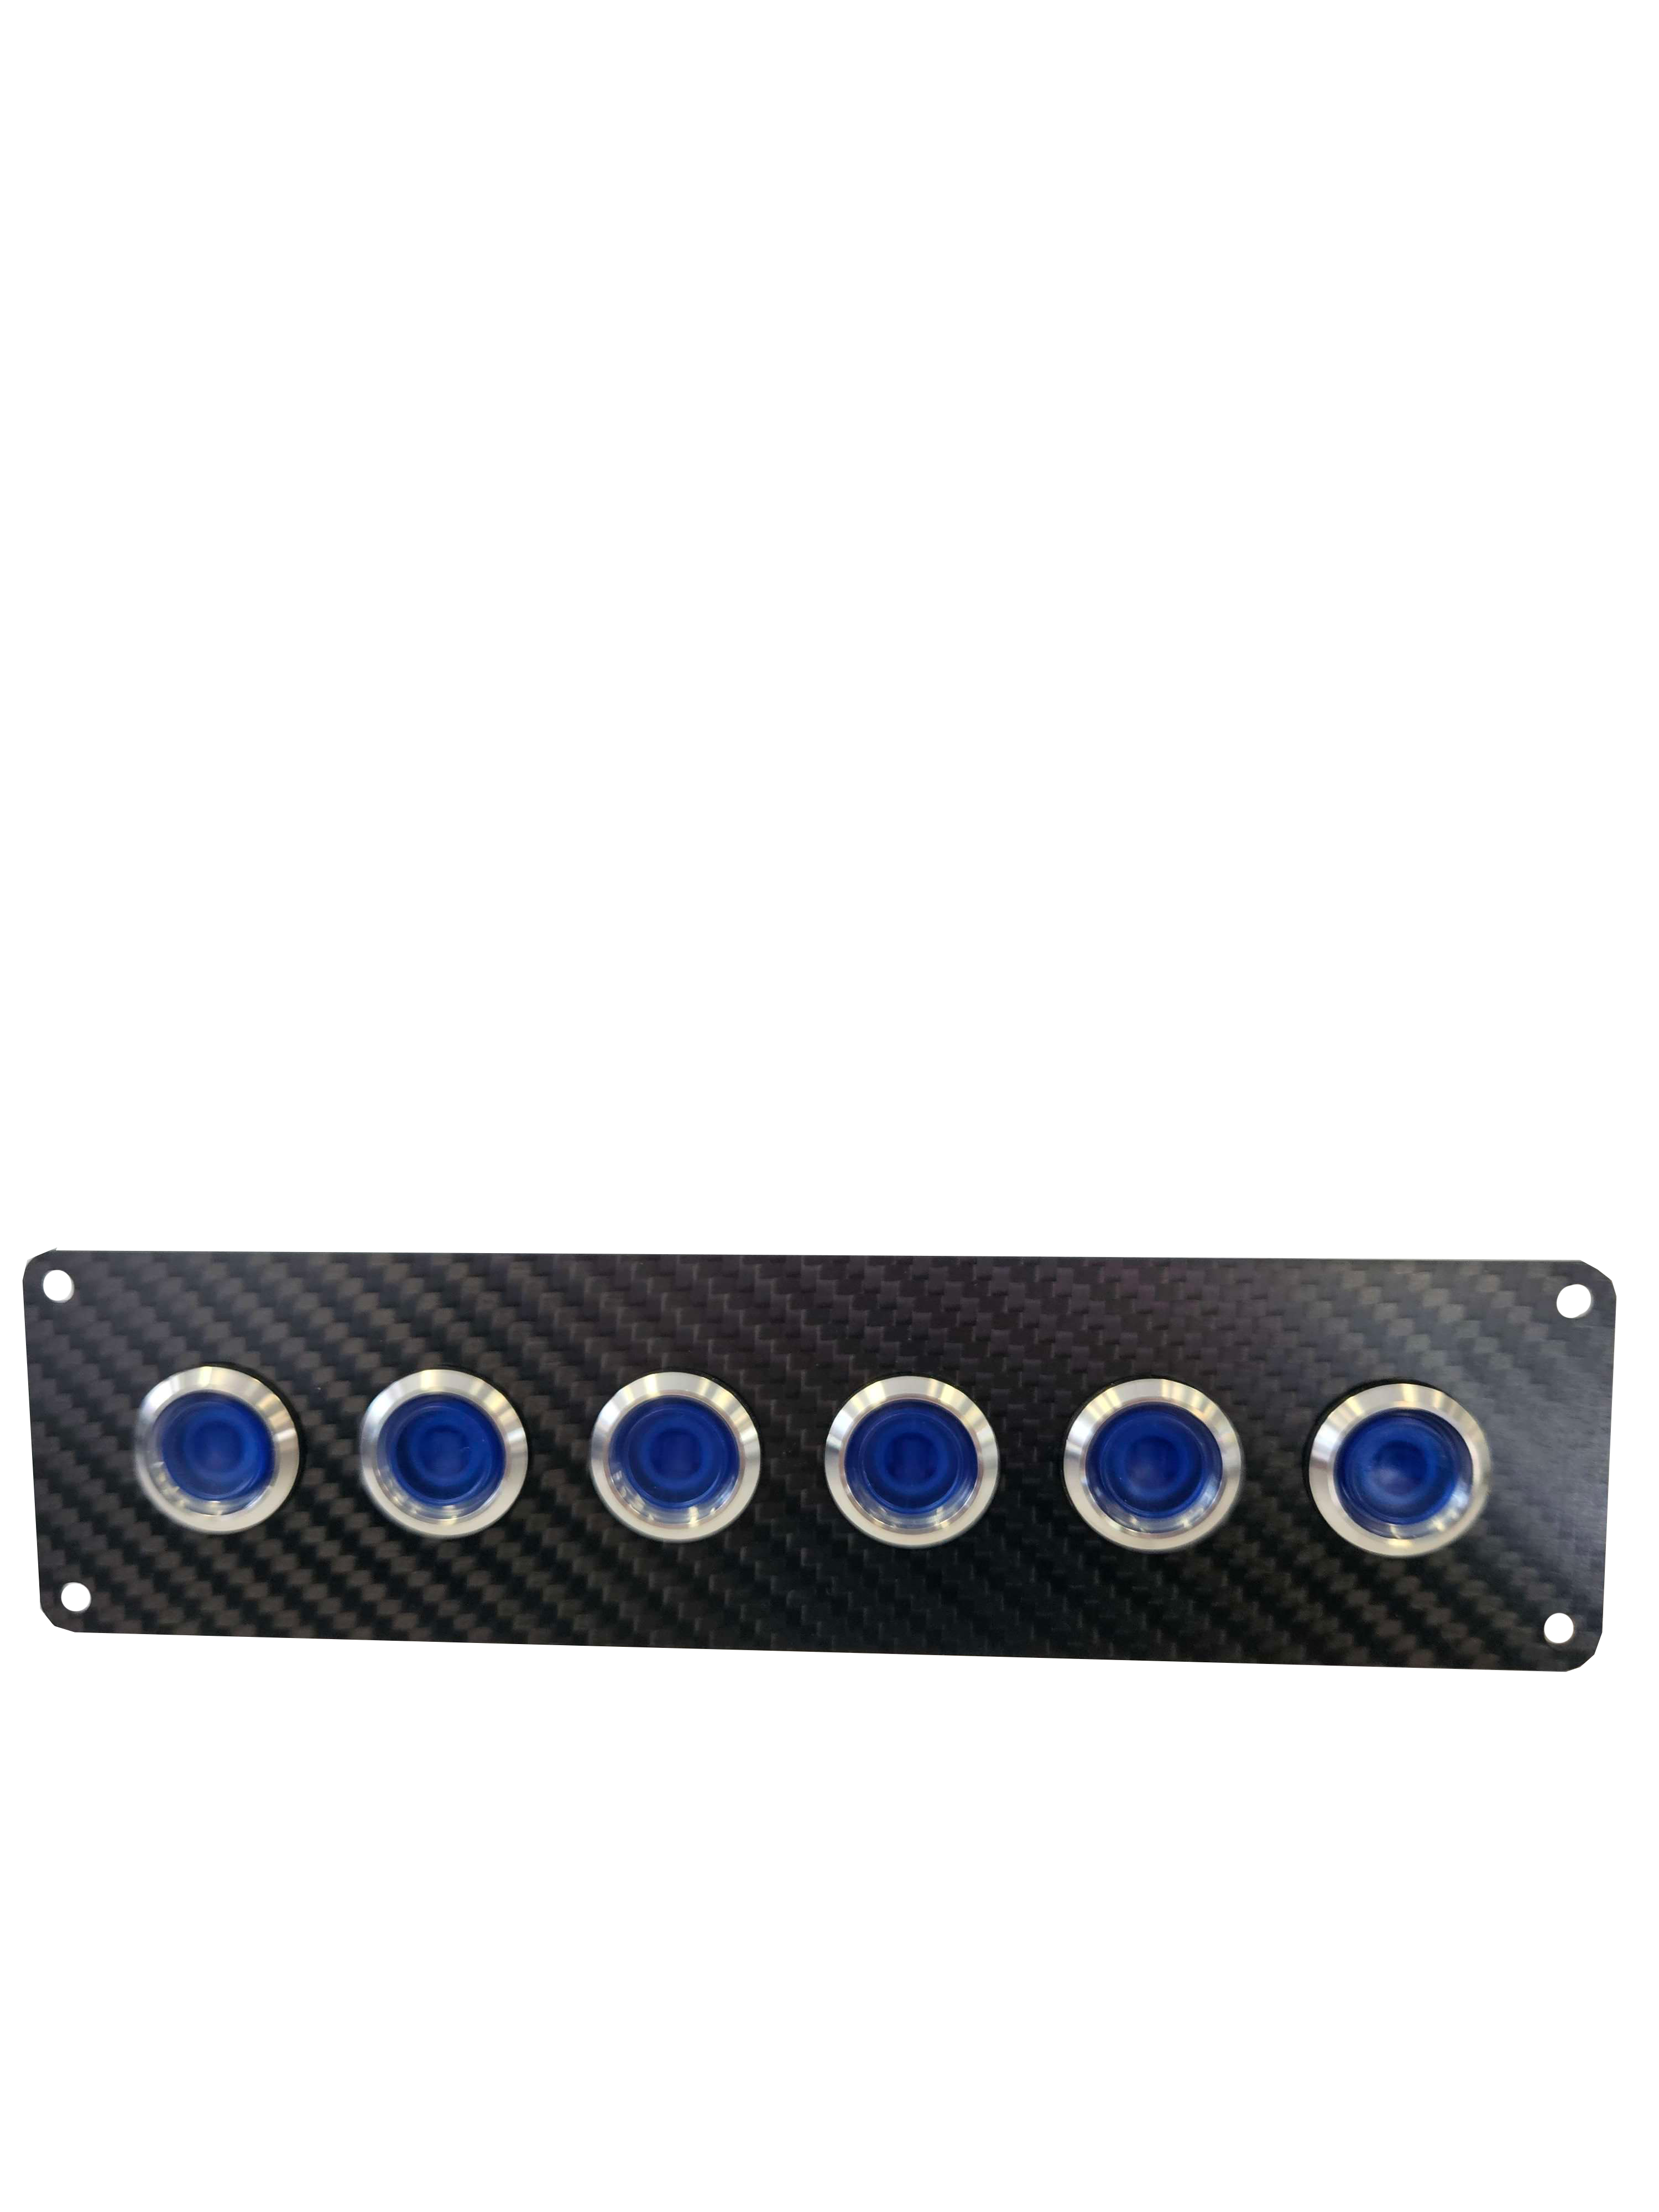 6 gang INLINE carbon fibre switch panel with 15A backlit switches